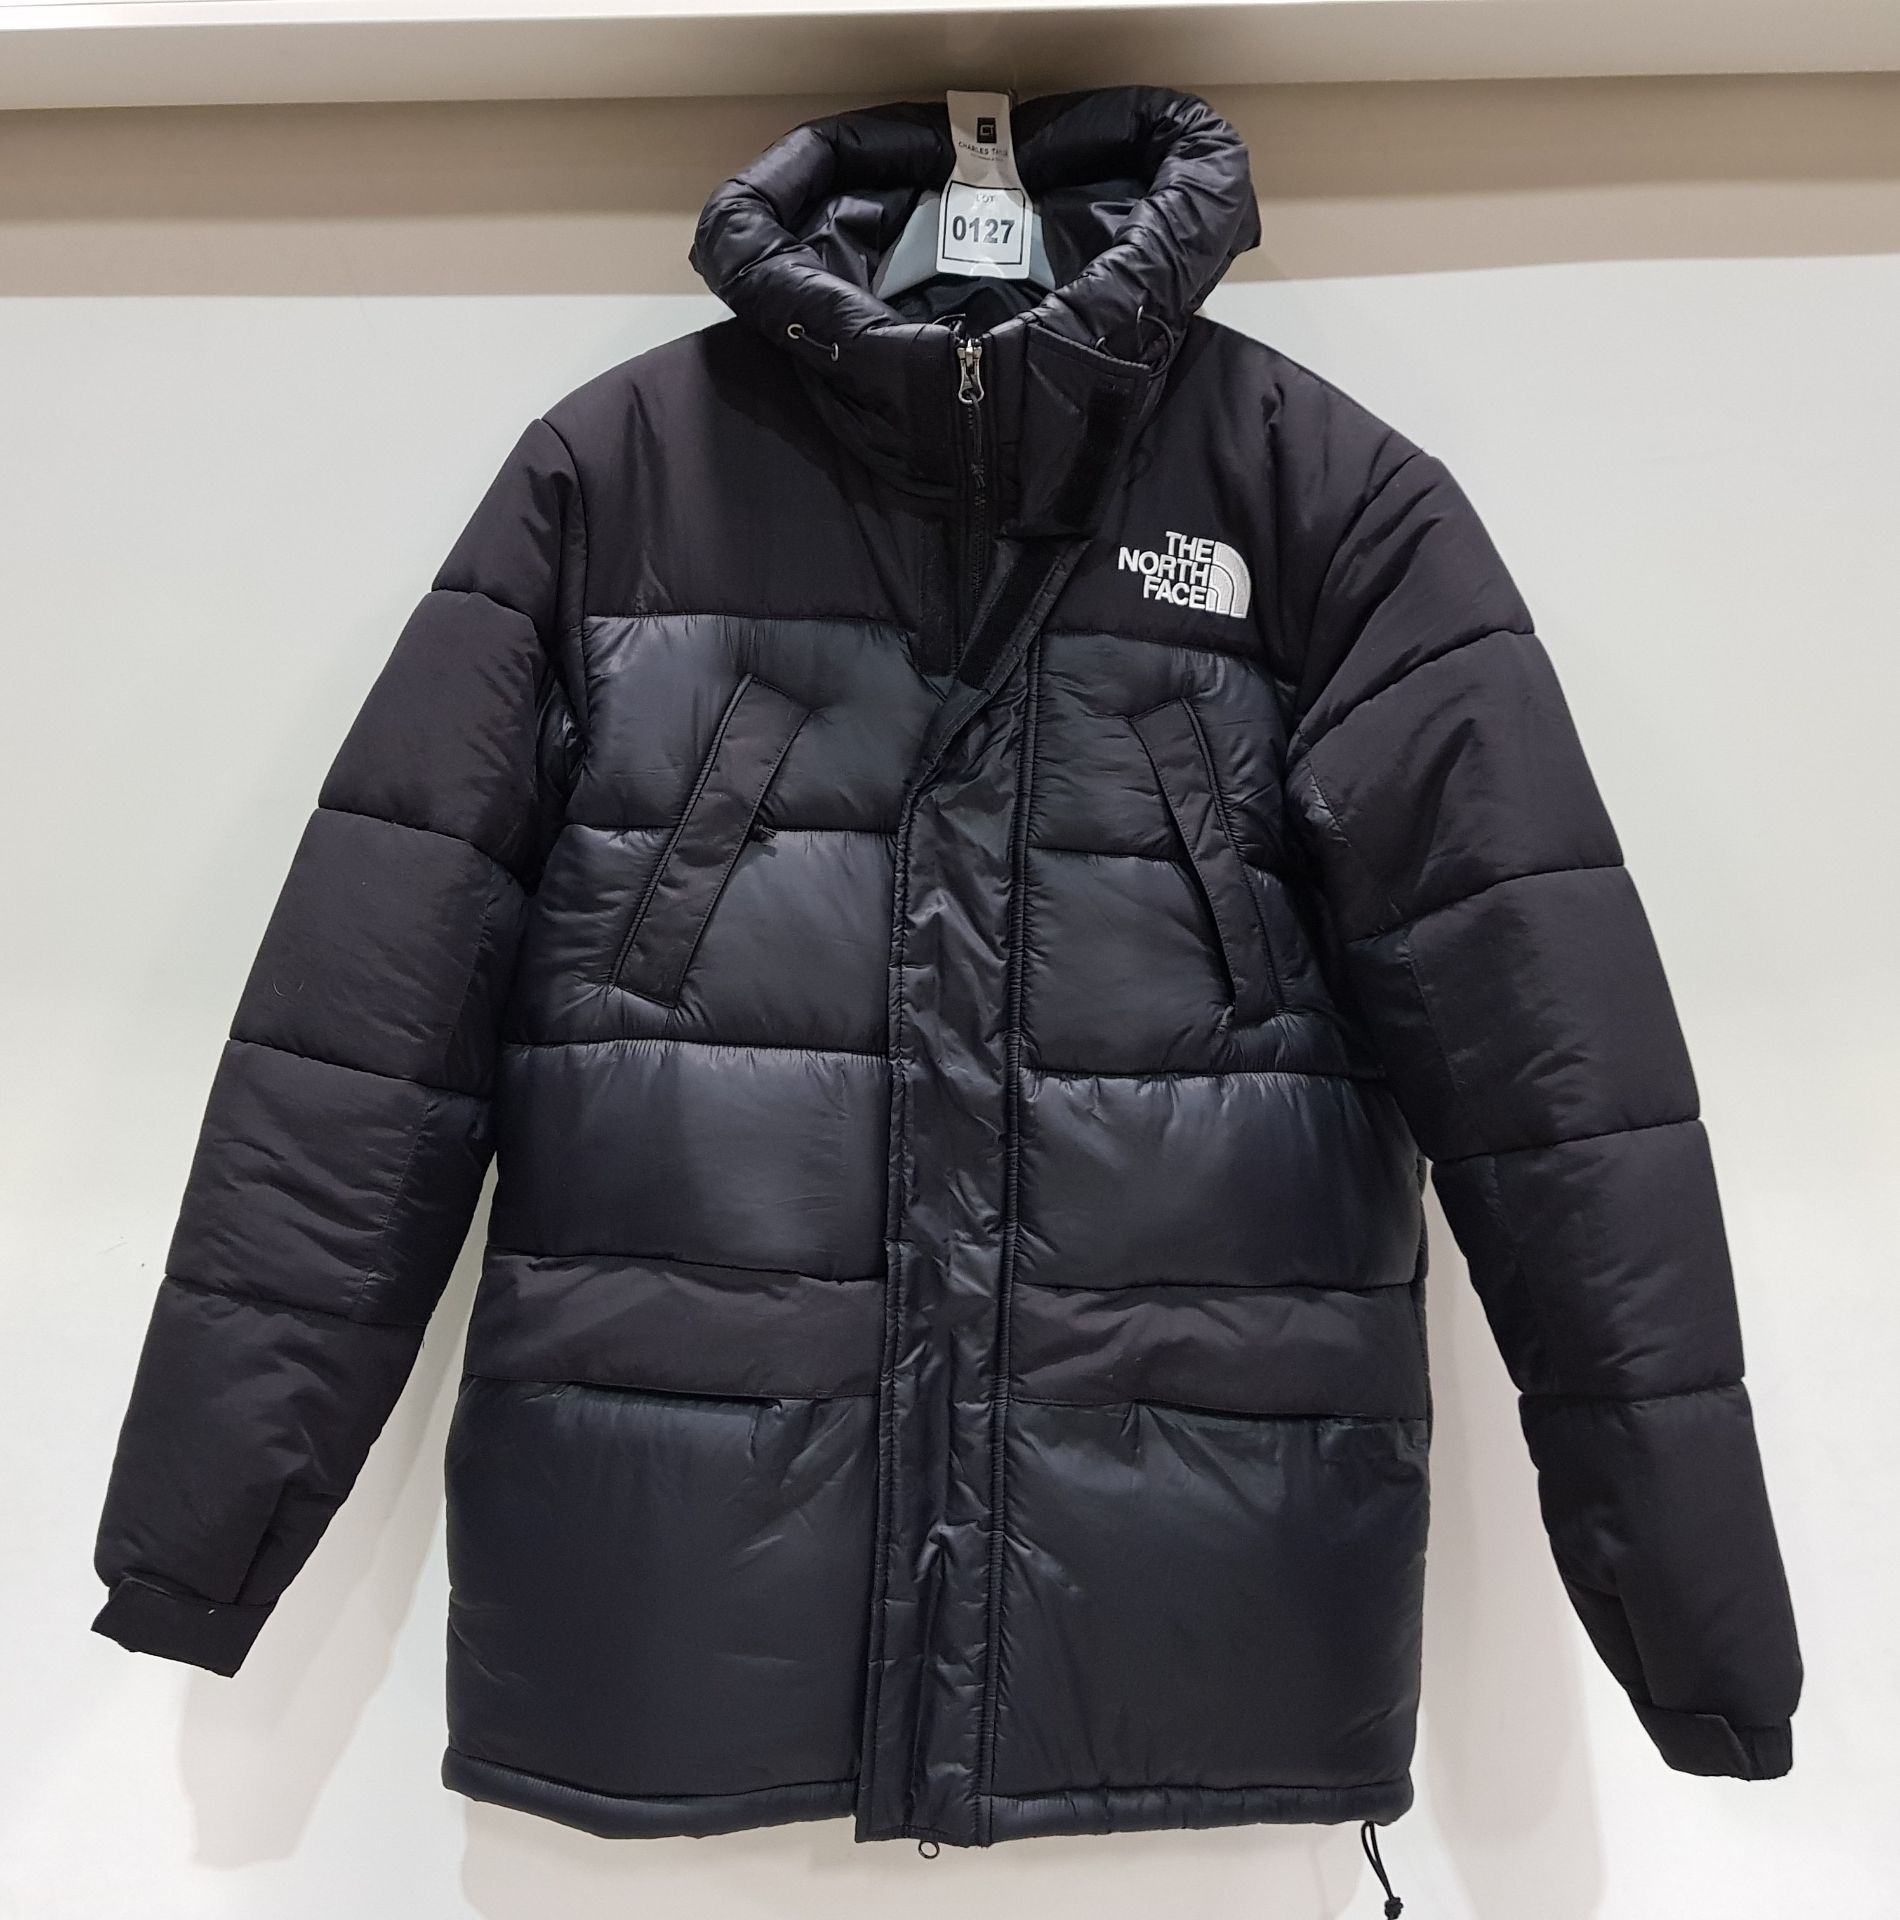 1 X BRAND NEW THE NORTH FACE QUILTED PUFFER JACKET IN BLACK SIZE LARGE